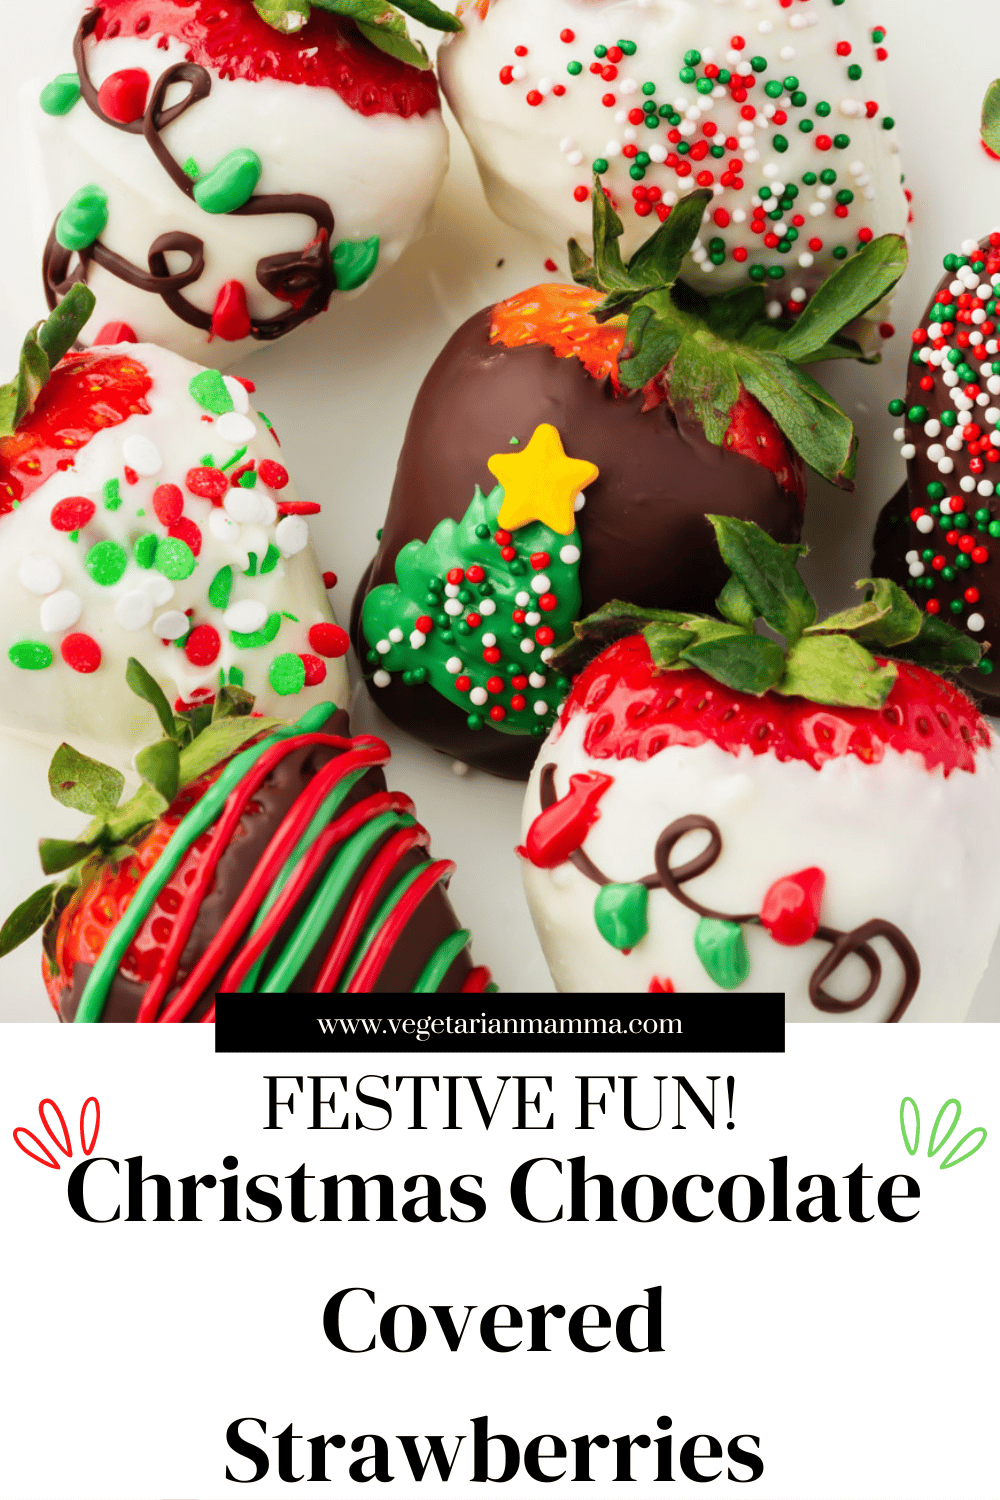 Christmas Chocolate Covered Strawberries are so fun for the holiday season! Have fun decorating strawberries for Christmas with sprinkles and candy melts.